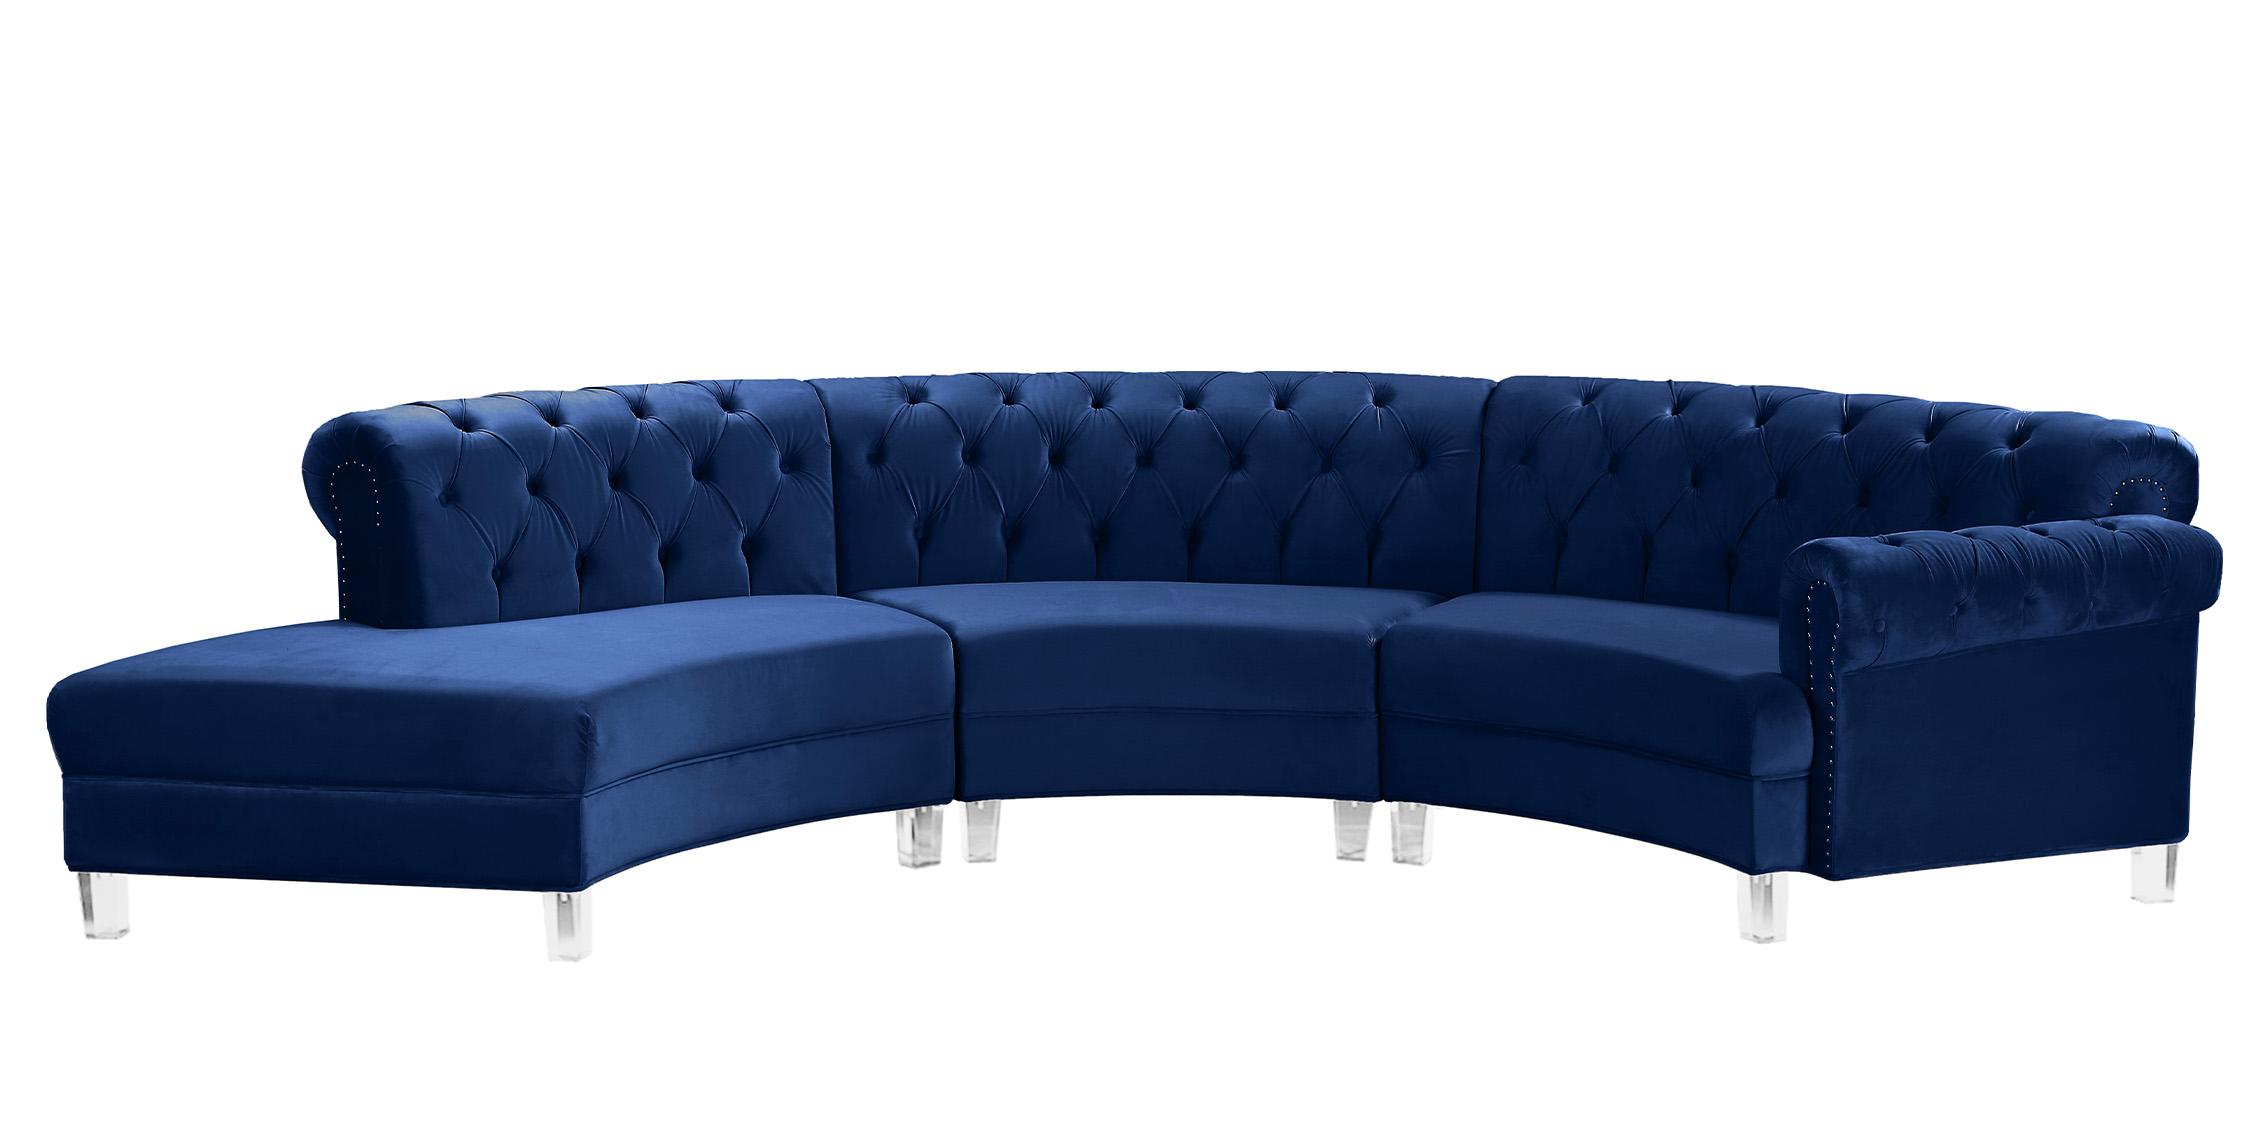 

    
Meridian Furniture ANABELLA 697Navy-3 Sectional Sofa Navy 697Navy-Sec-3PC
